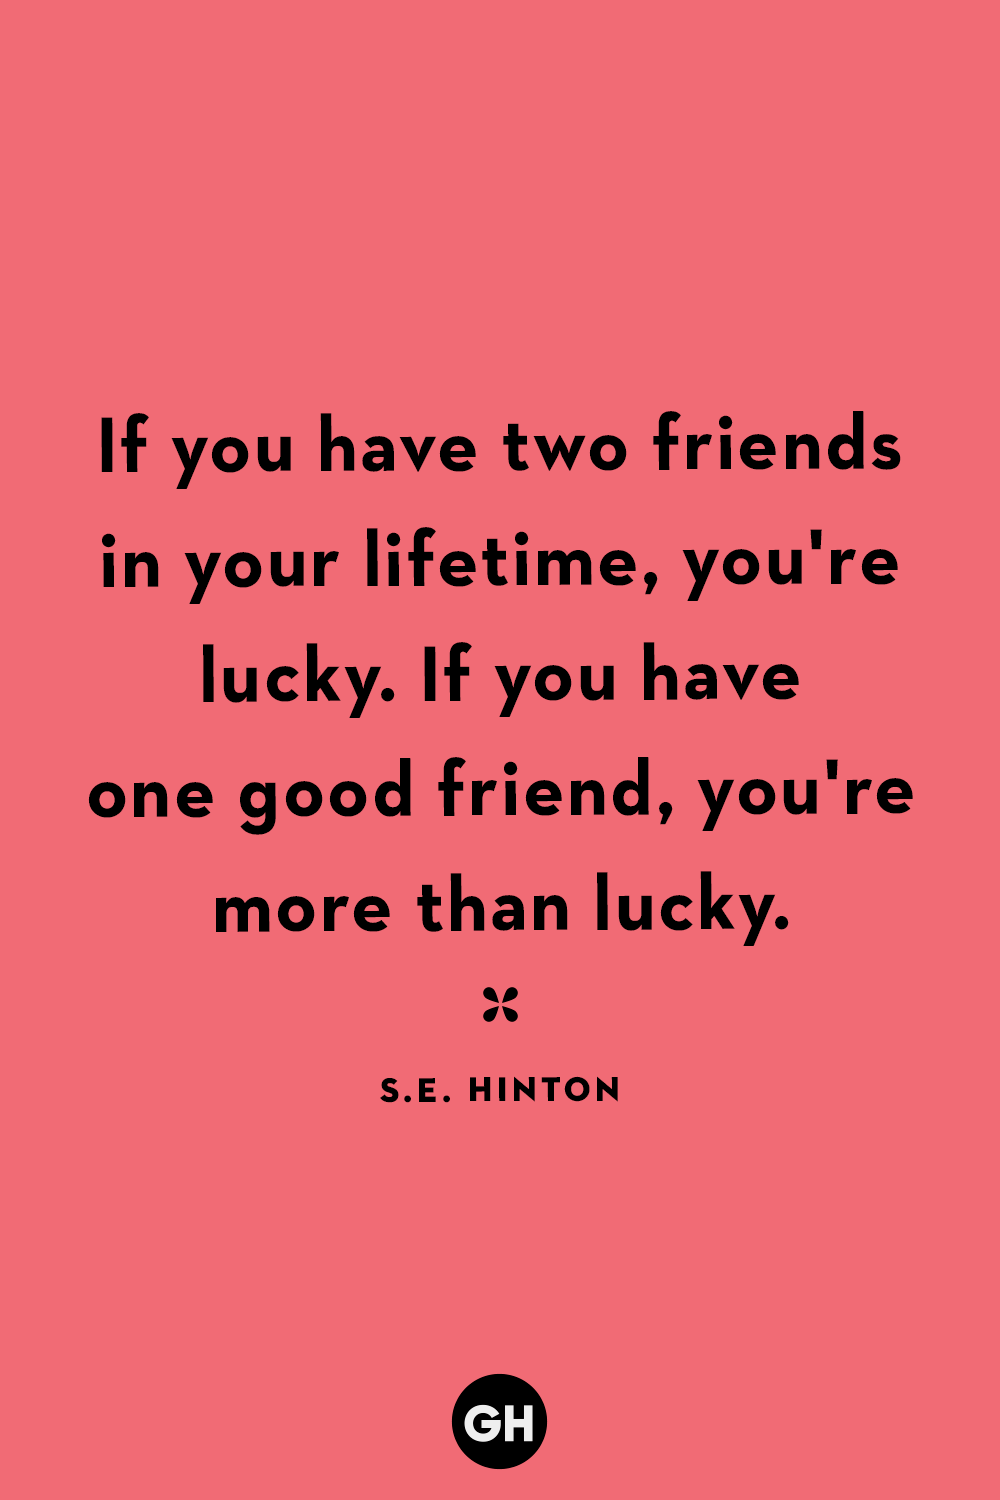 https://hips.hearstapps.com/hmg-prod/images/gh-friendship-quotes-s-e-hinton-64493546ed6eb.png